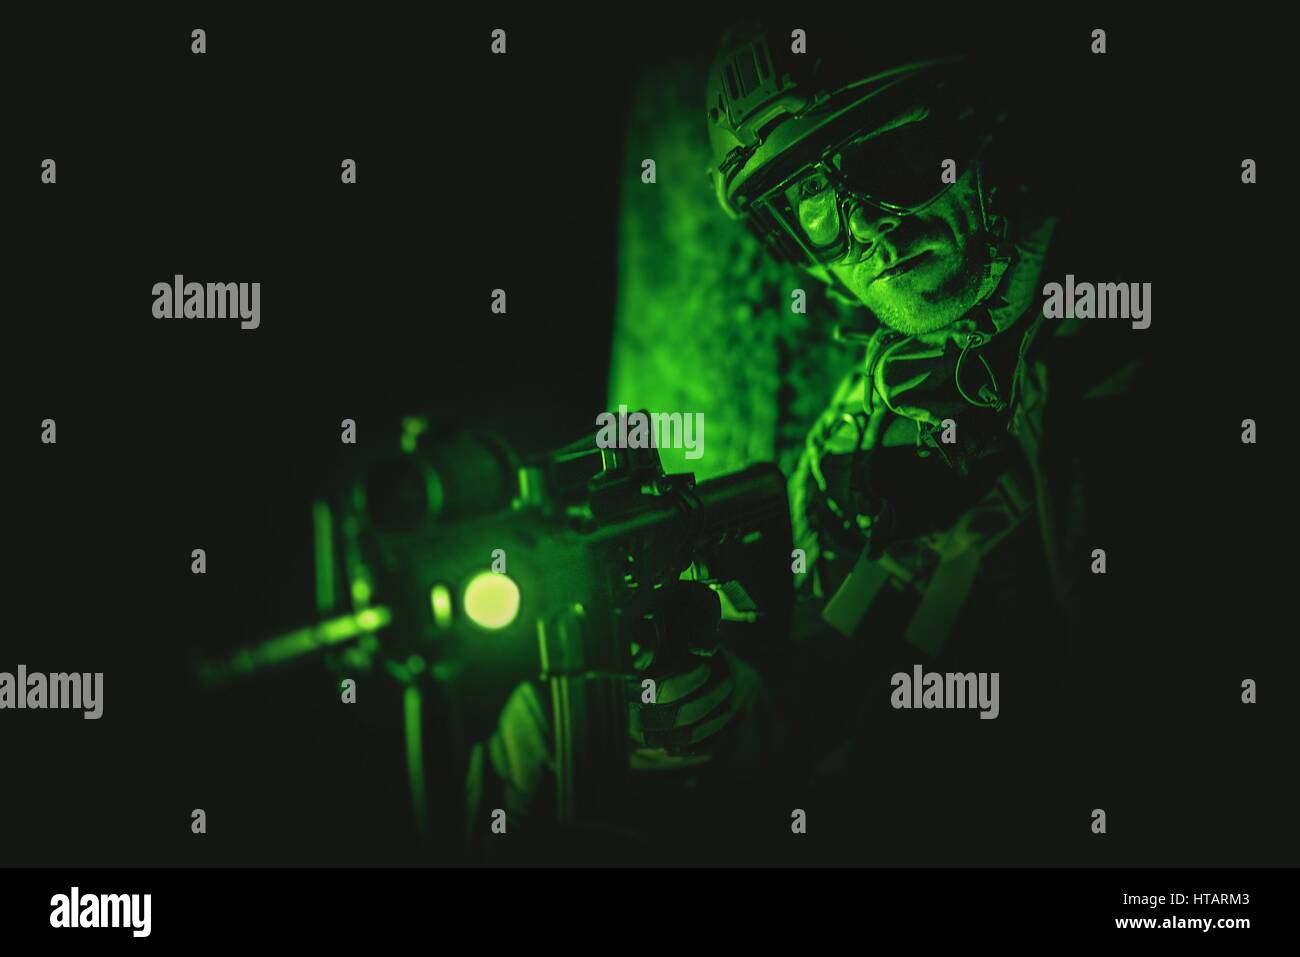 Soldier Night Vision Spotting. Military Concept. Operation at Night. Stock Photo